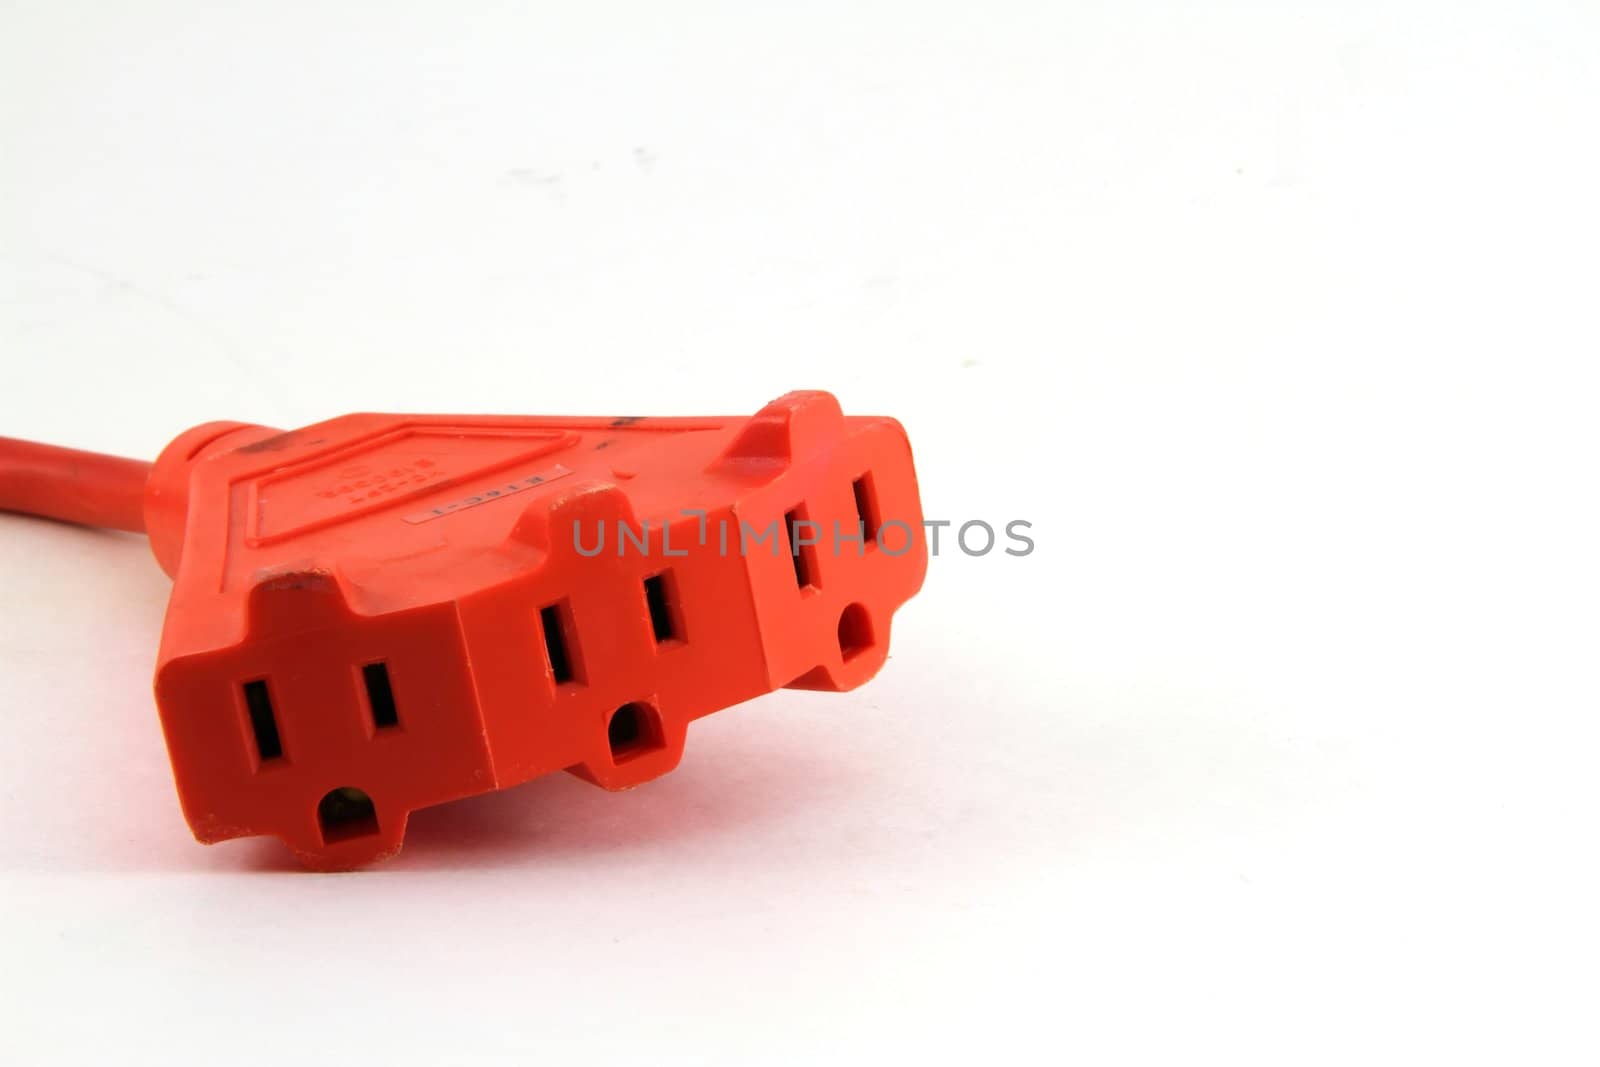 A triple socket extension cord isolated on white.